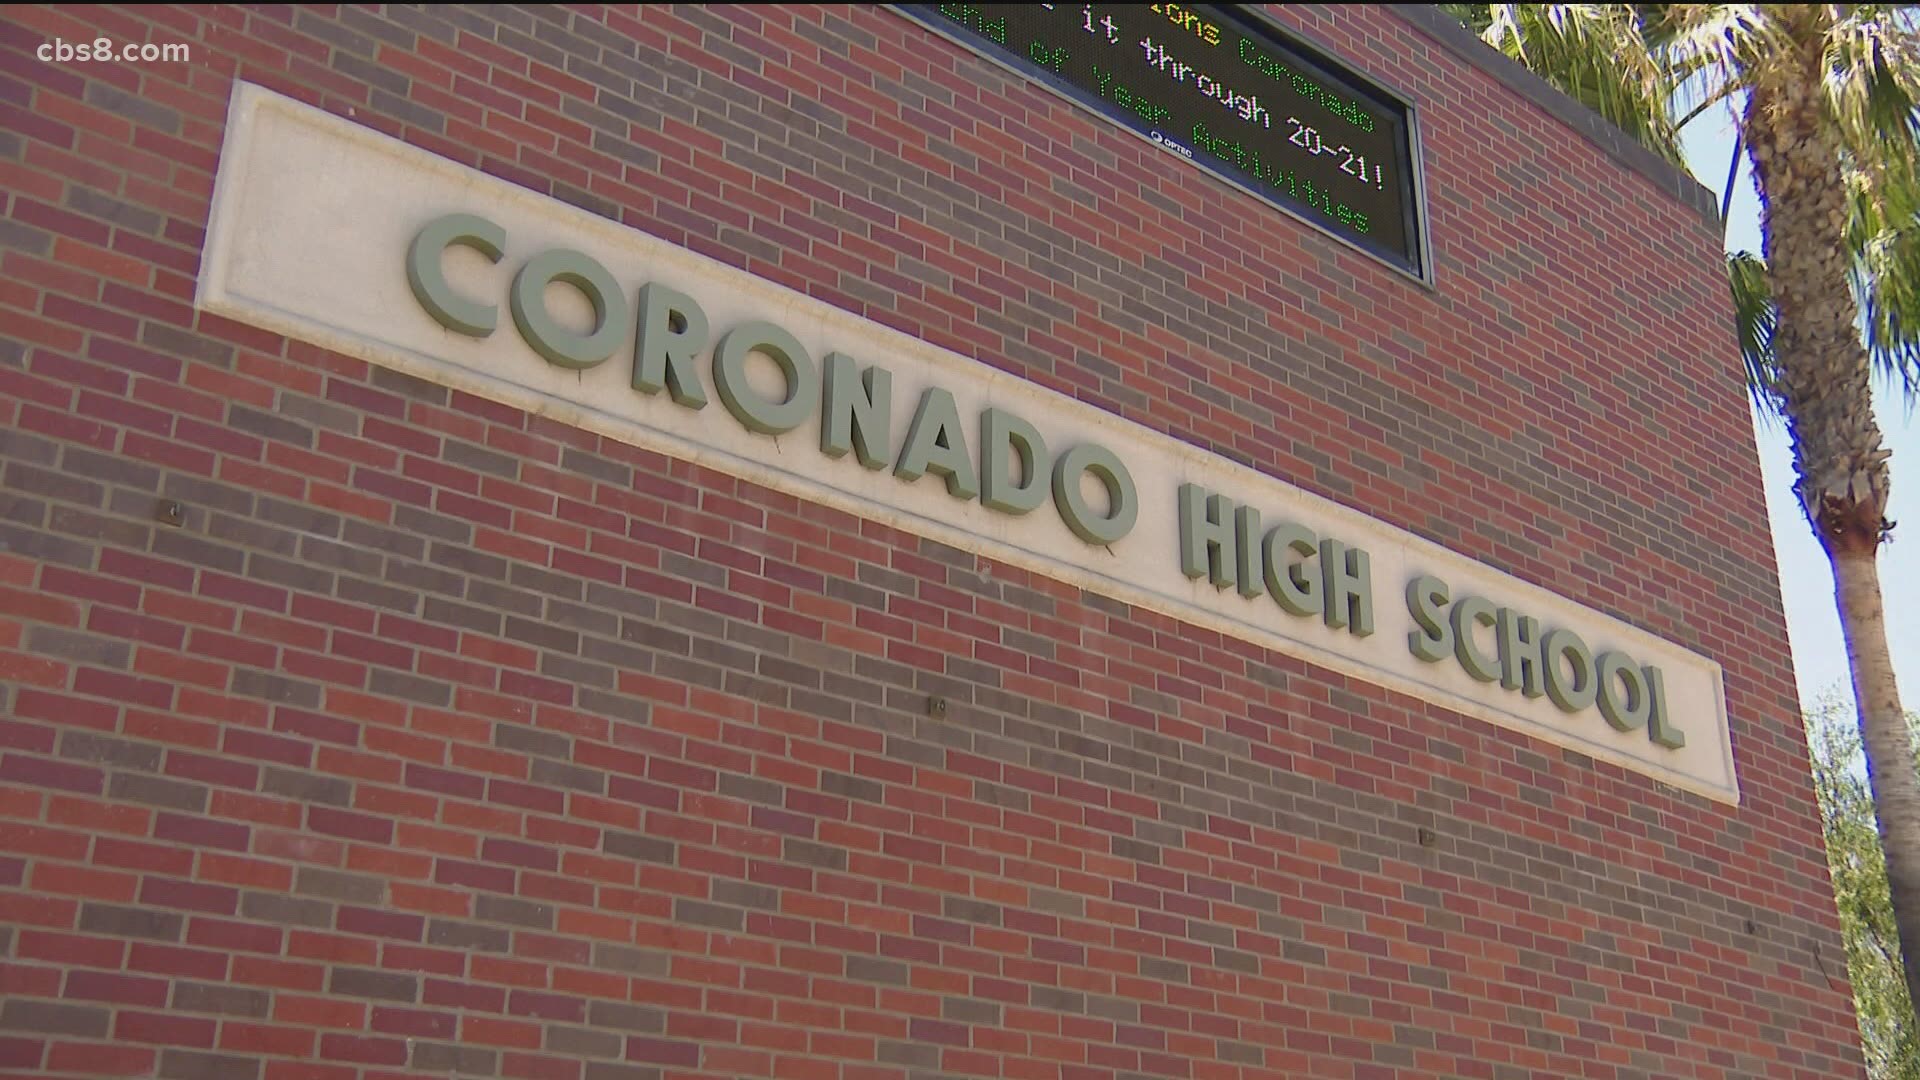 A Coronado group called, “InclusioNado” held a bilingual media conference Tuesday to offer a public apology from the Coronado community to the Escondido community.